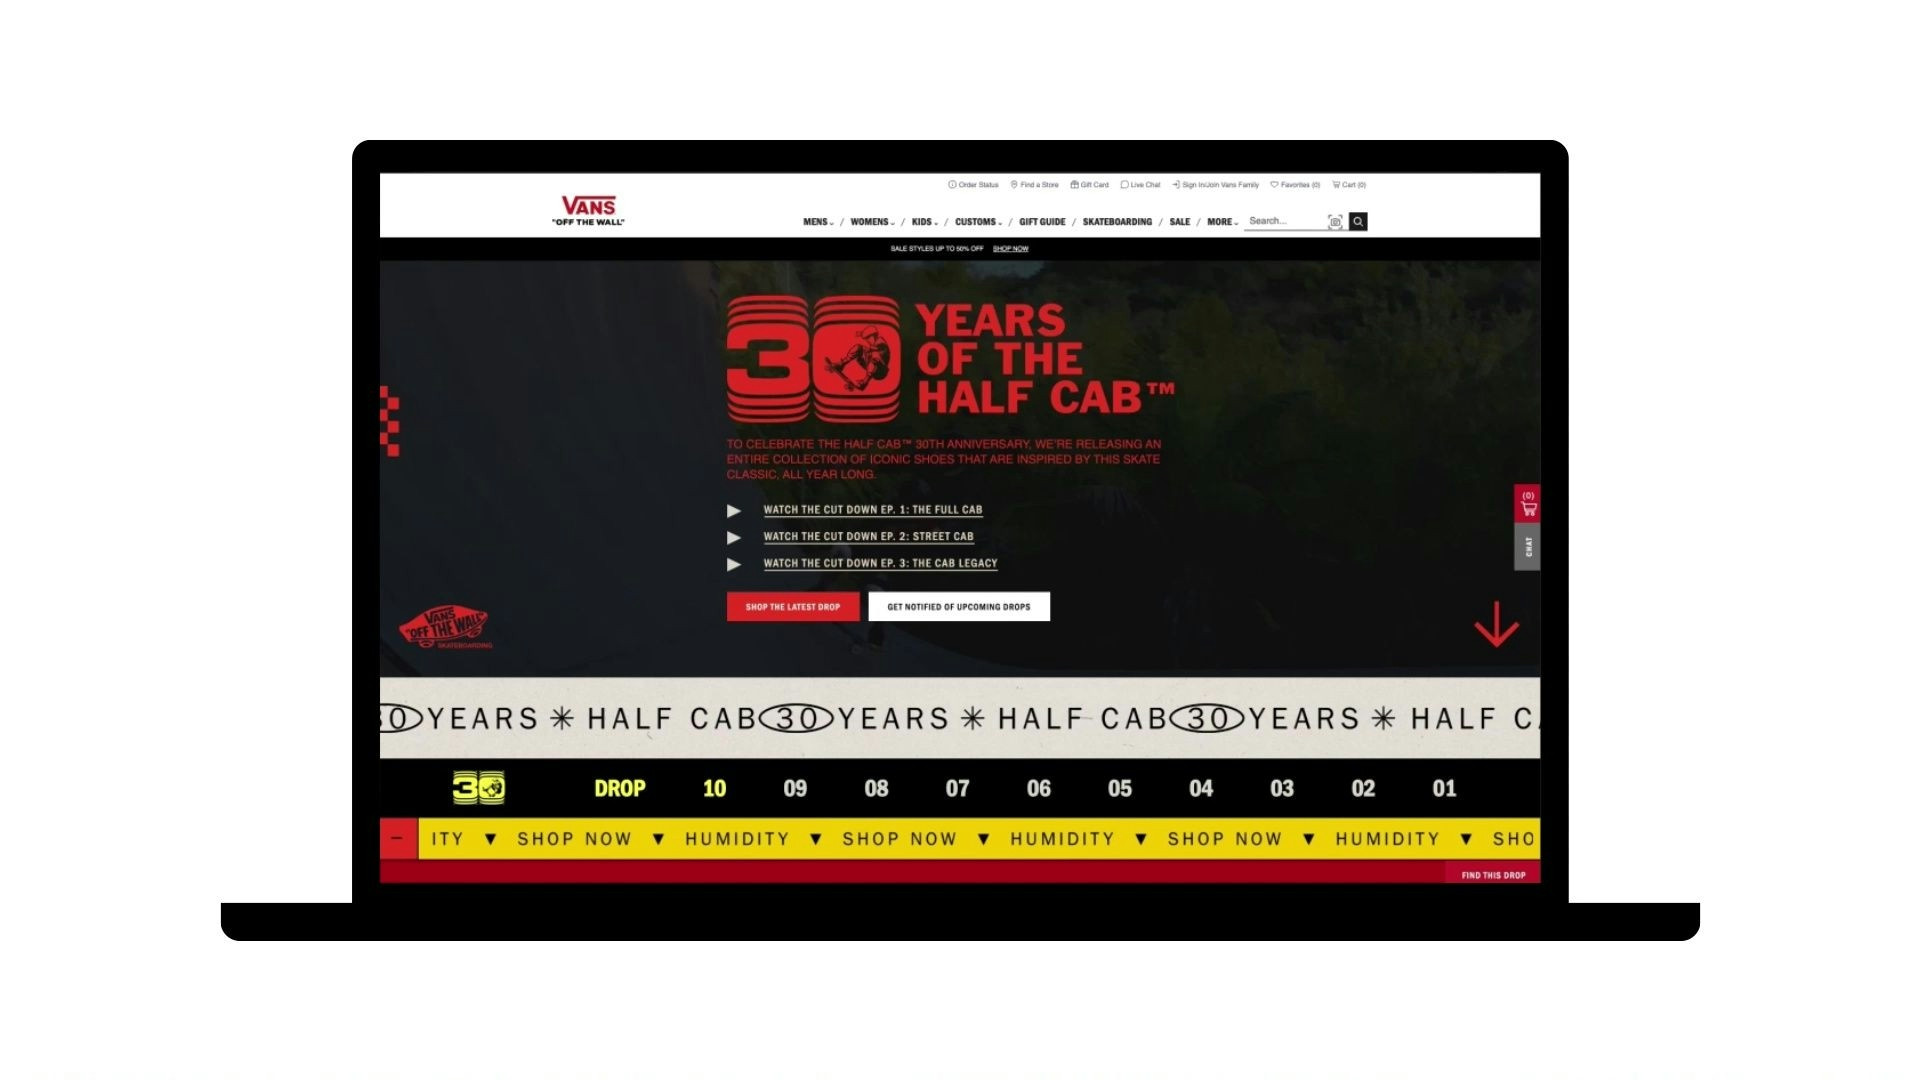 Video clip scrolling the maketing landing page design for the Vans 30 Years of the Half Cab Campaign